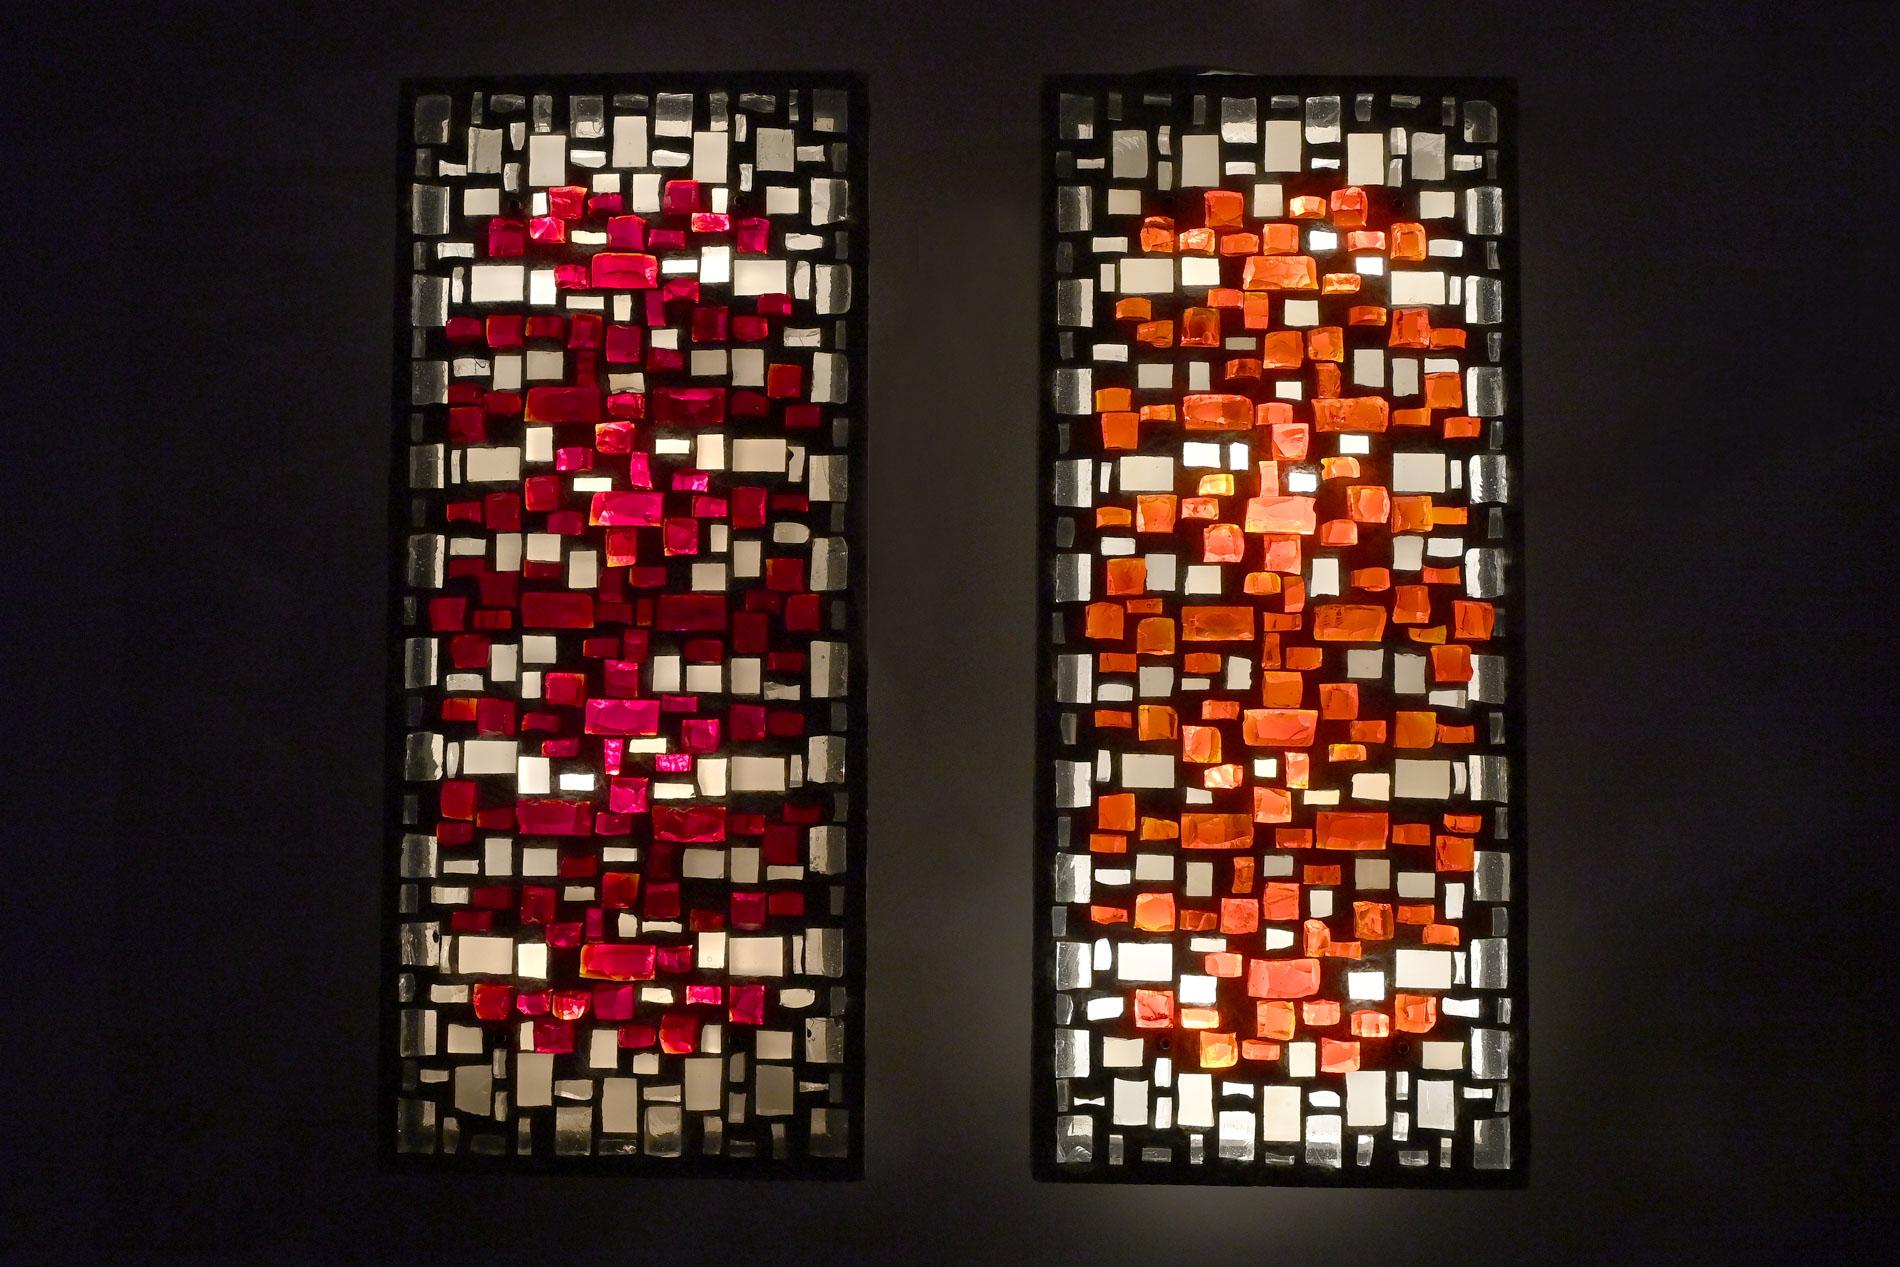 Pair of wall appliques with inset colorless and bumped red and orange glass stones, and satin glass stones.
Rectangular cement cast plates in which the glass artist has arranged these glass stones.
They are provided with power outlets and equipped